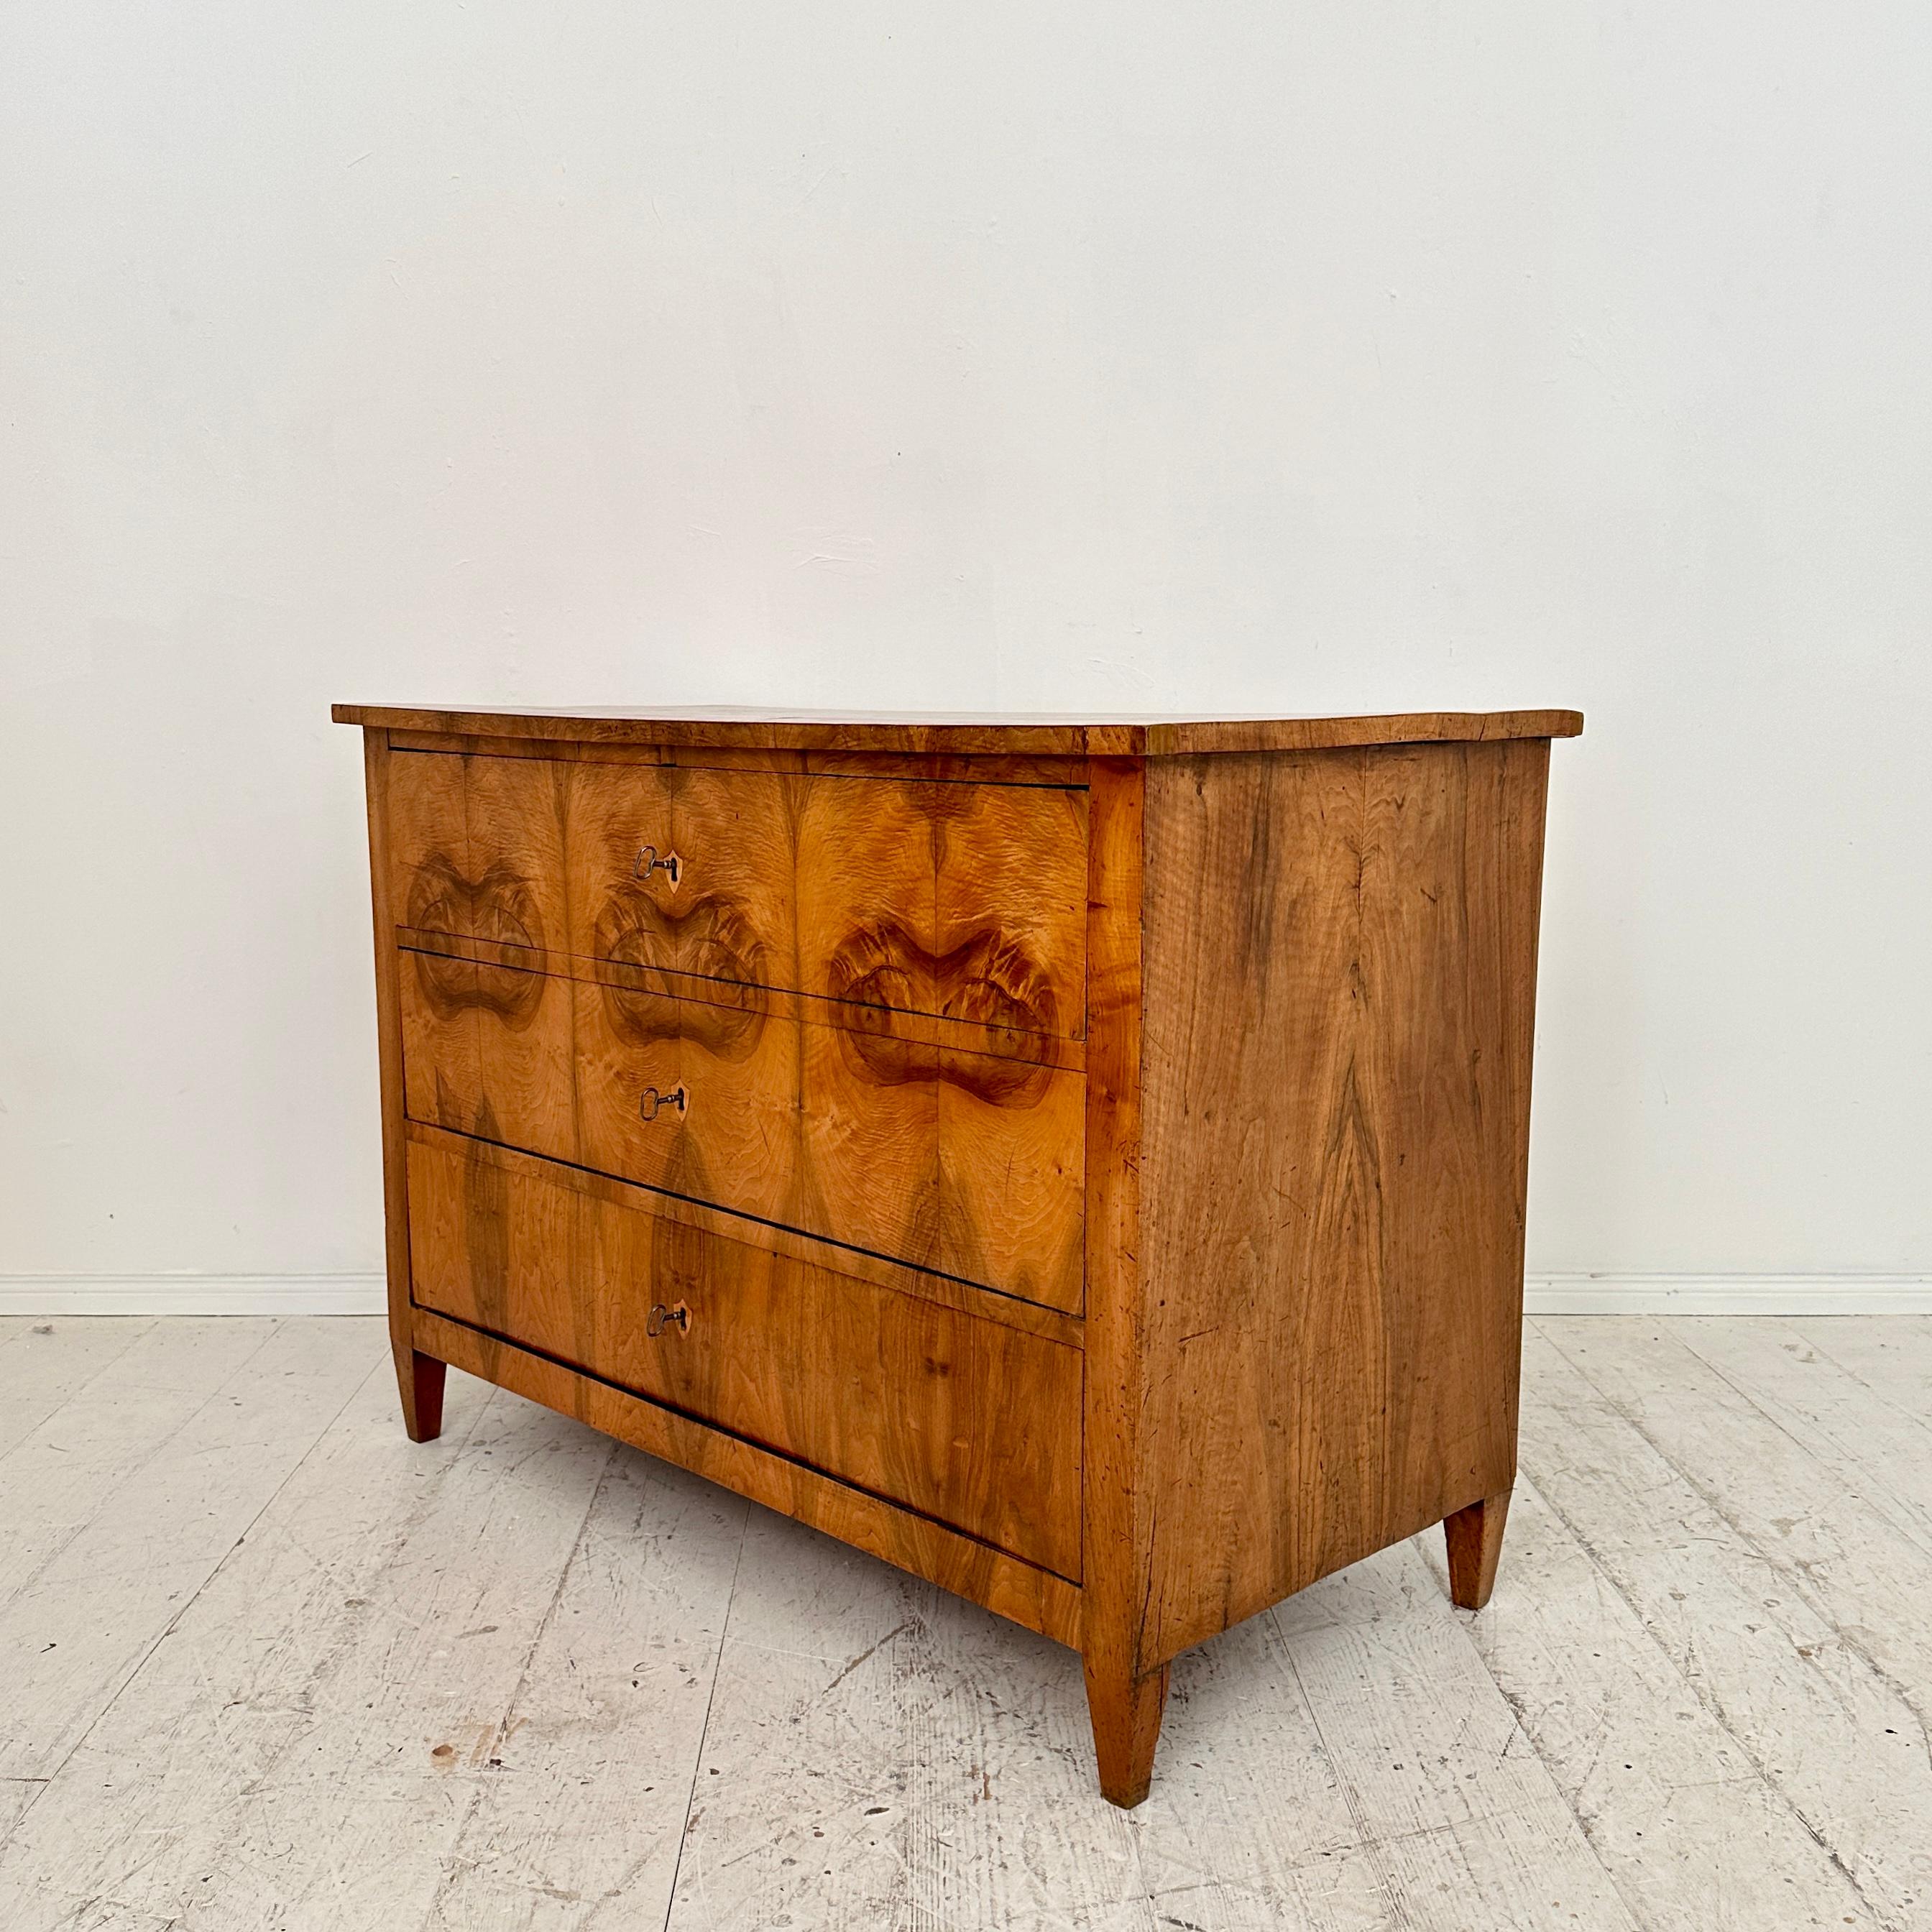 19th Century German Biedermeier Chest of Drawers in Walnut with 3 Drawers, 1820 In Good Condition For Sale In Berlin, DE